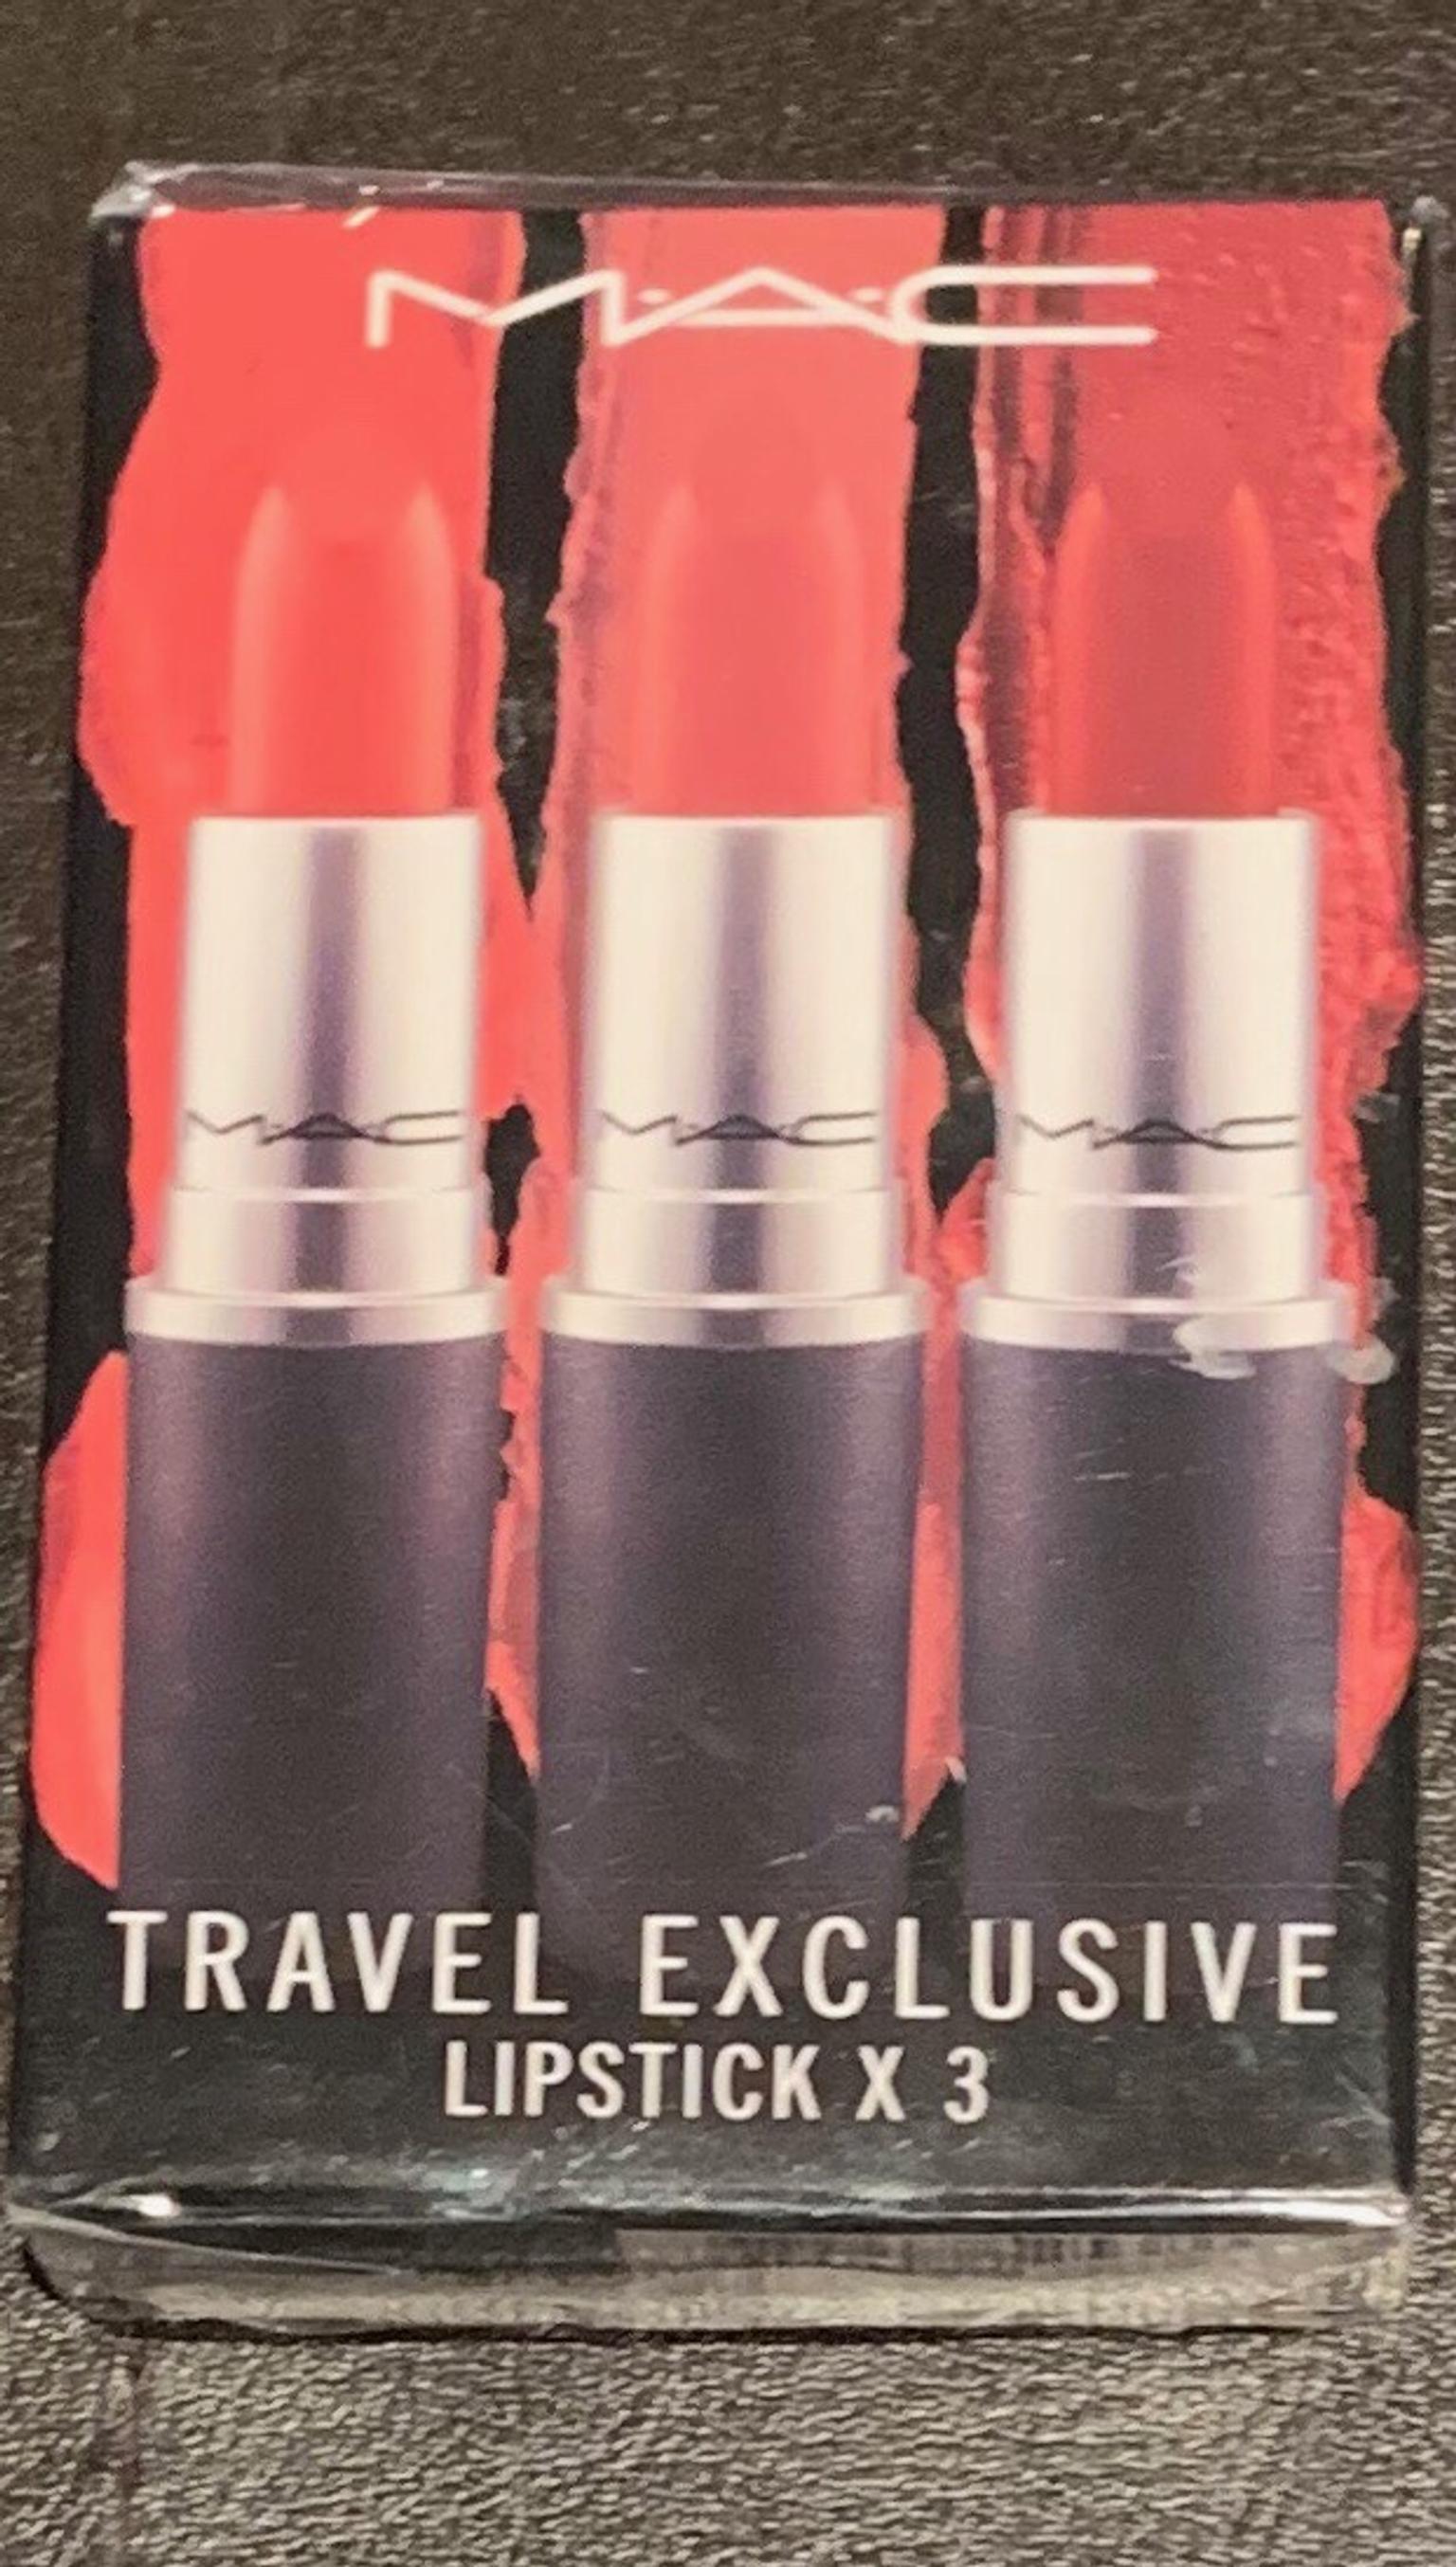 Mac Travel Exclusive Lipstick Trio in ST5Lyme for £15.00